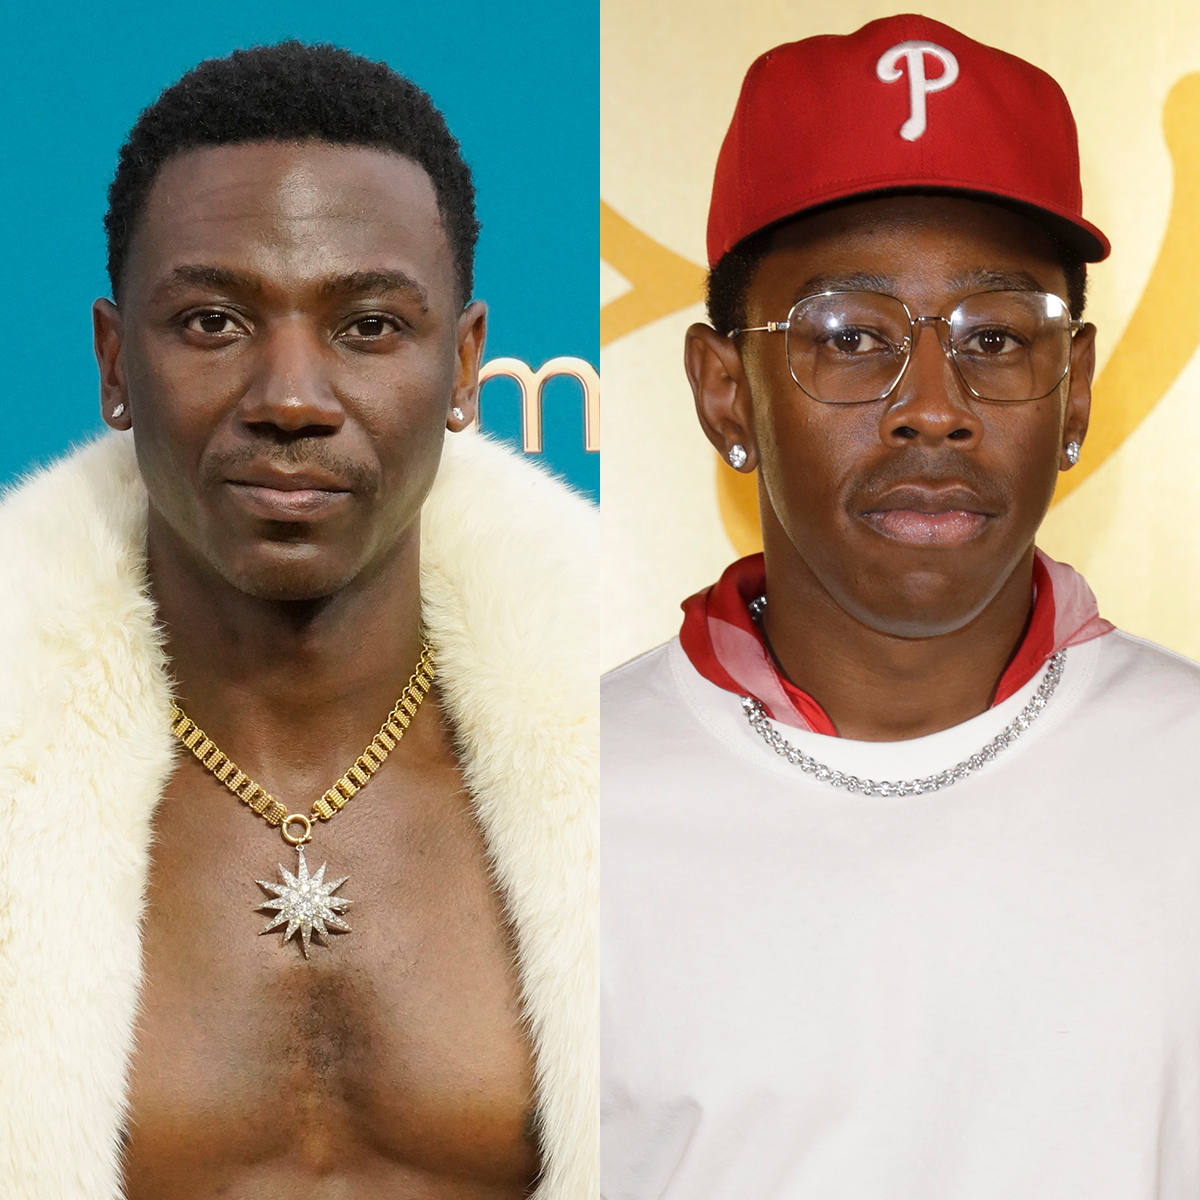 Jerrod Carmichael Shares Update on Tyler the Creator Friendship After "Chaotic" Chat Goes Viral